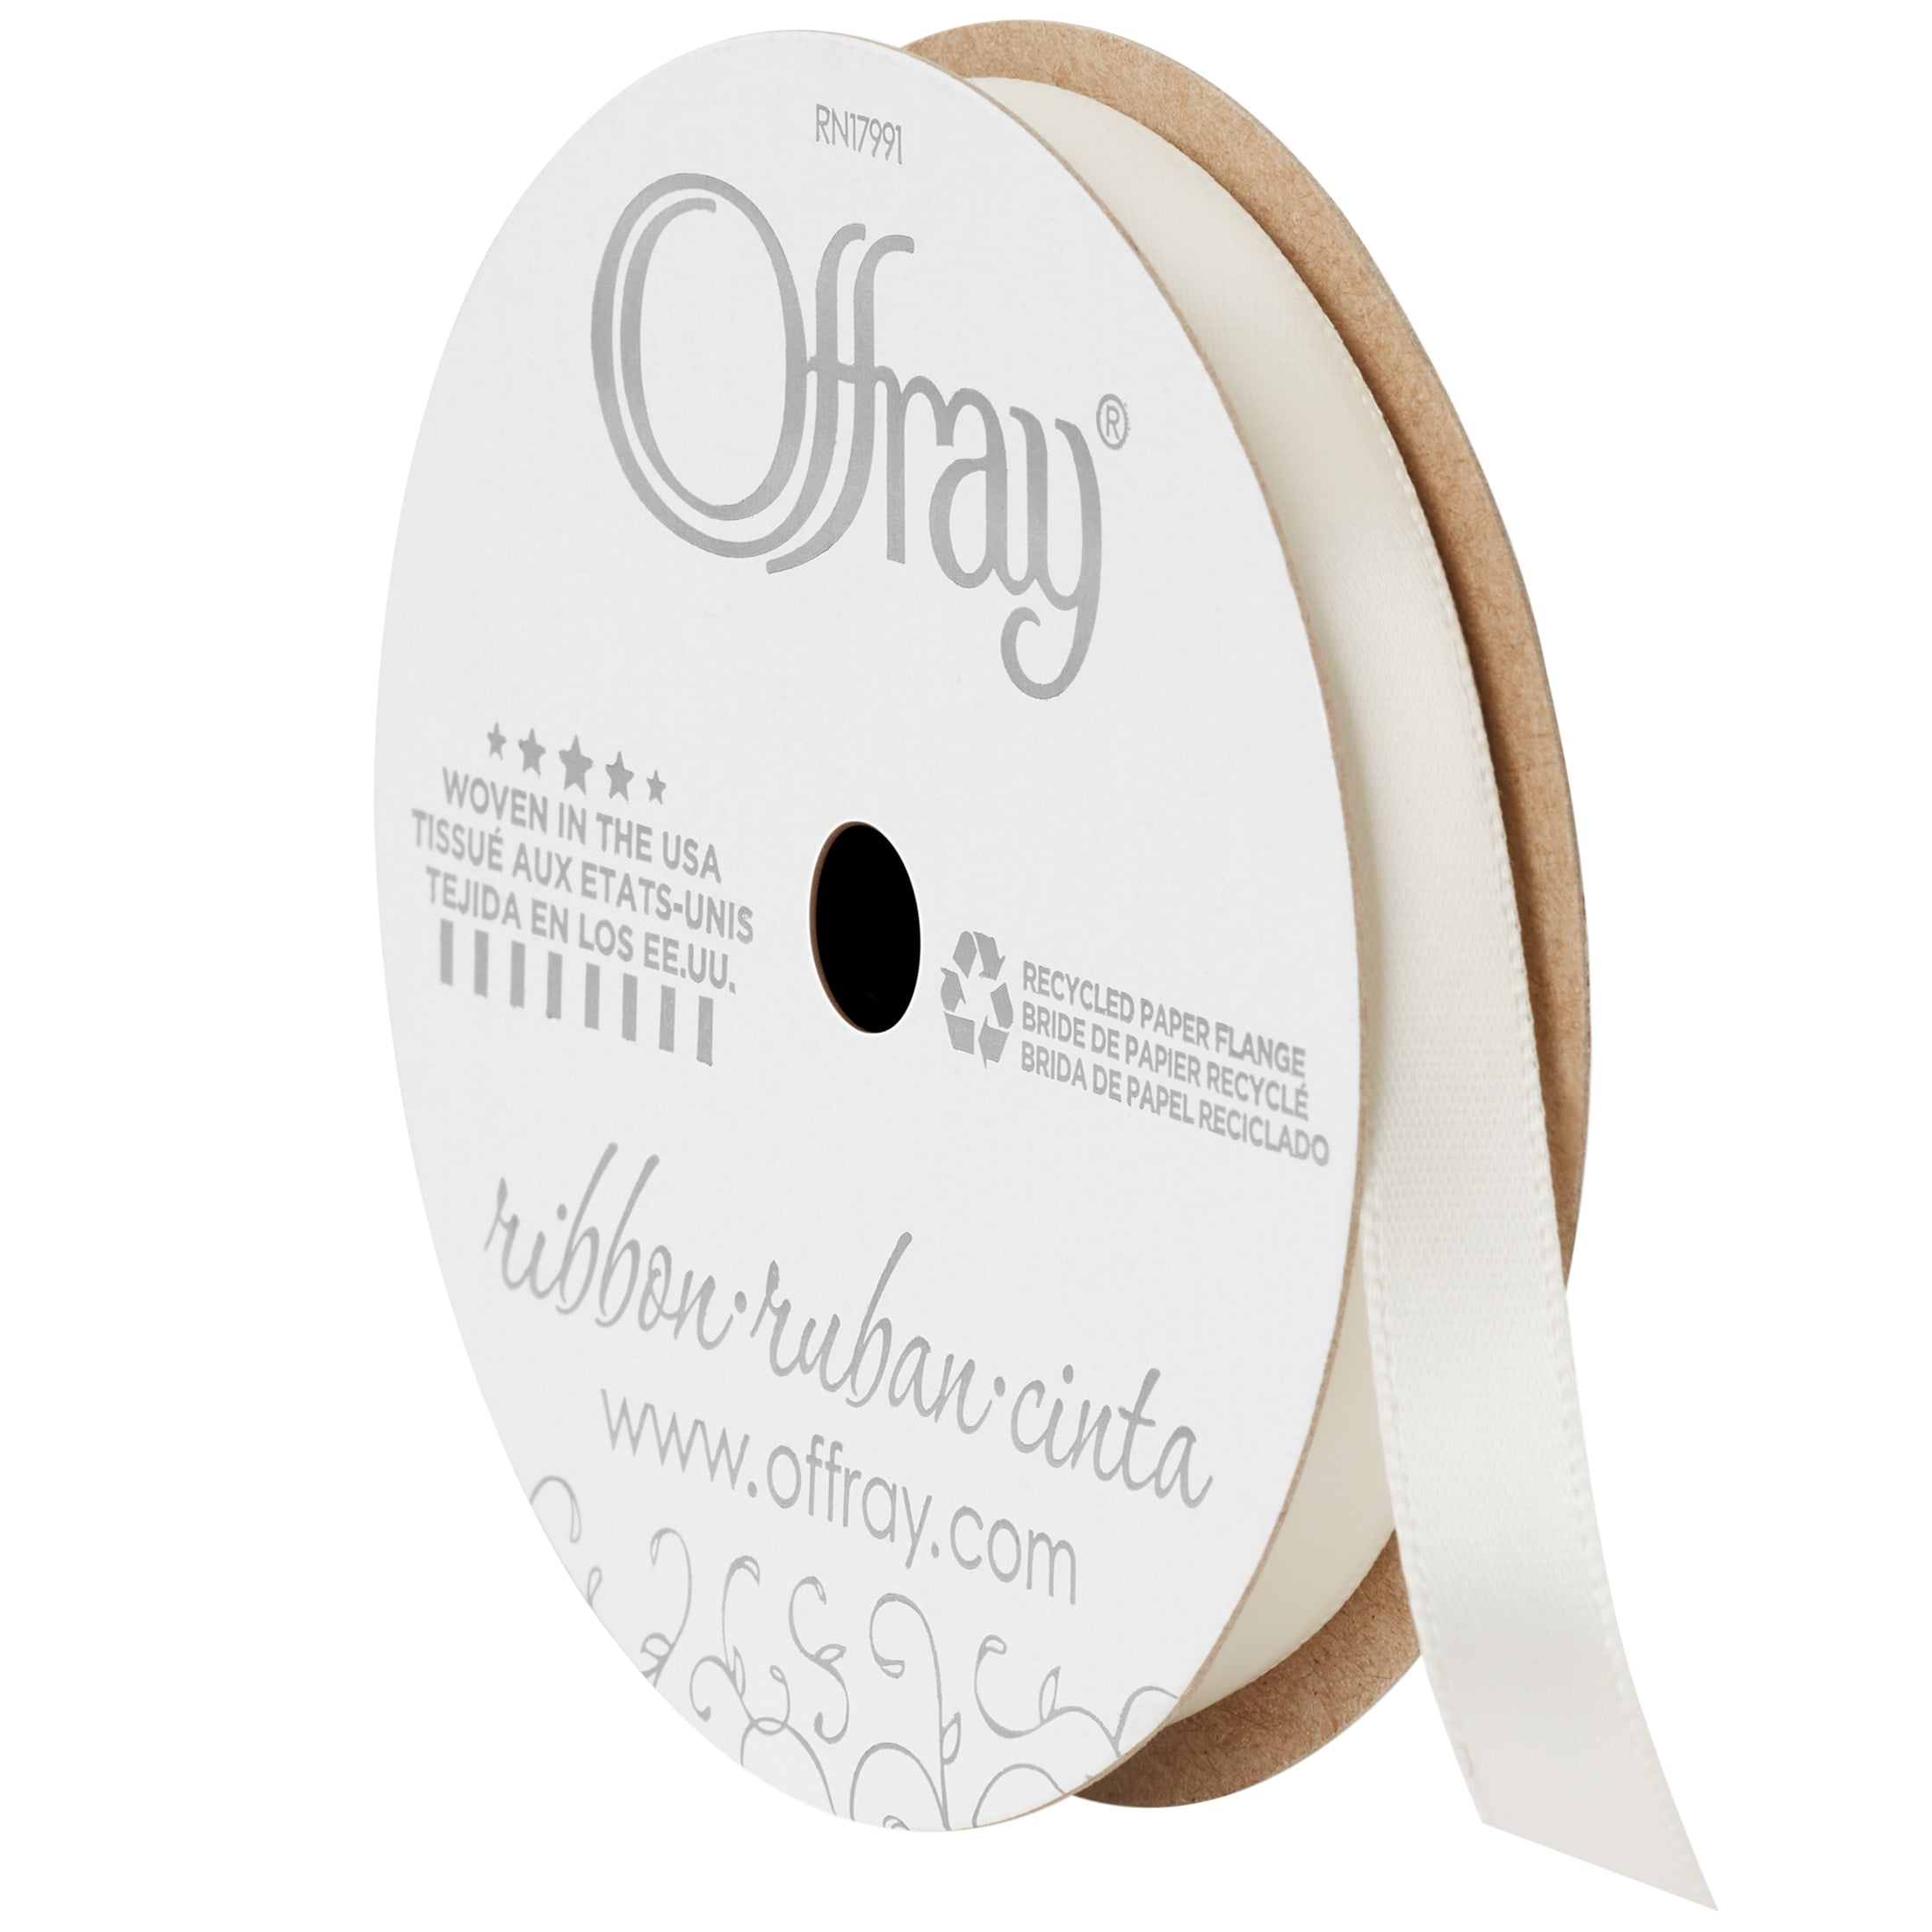 Offray Ribbon, Antique White 3/8 inch Single Face Satin Polyester Ribbon, 18 feet